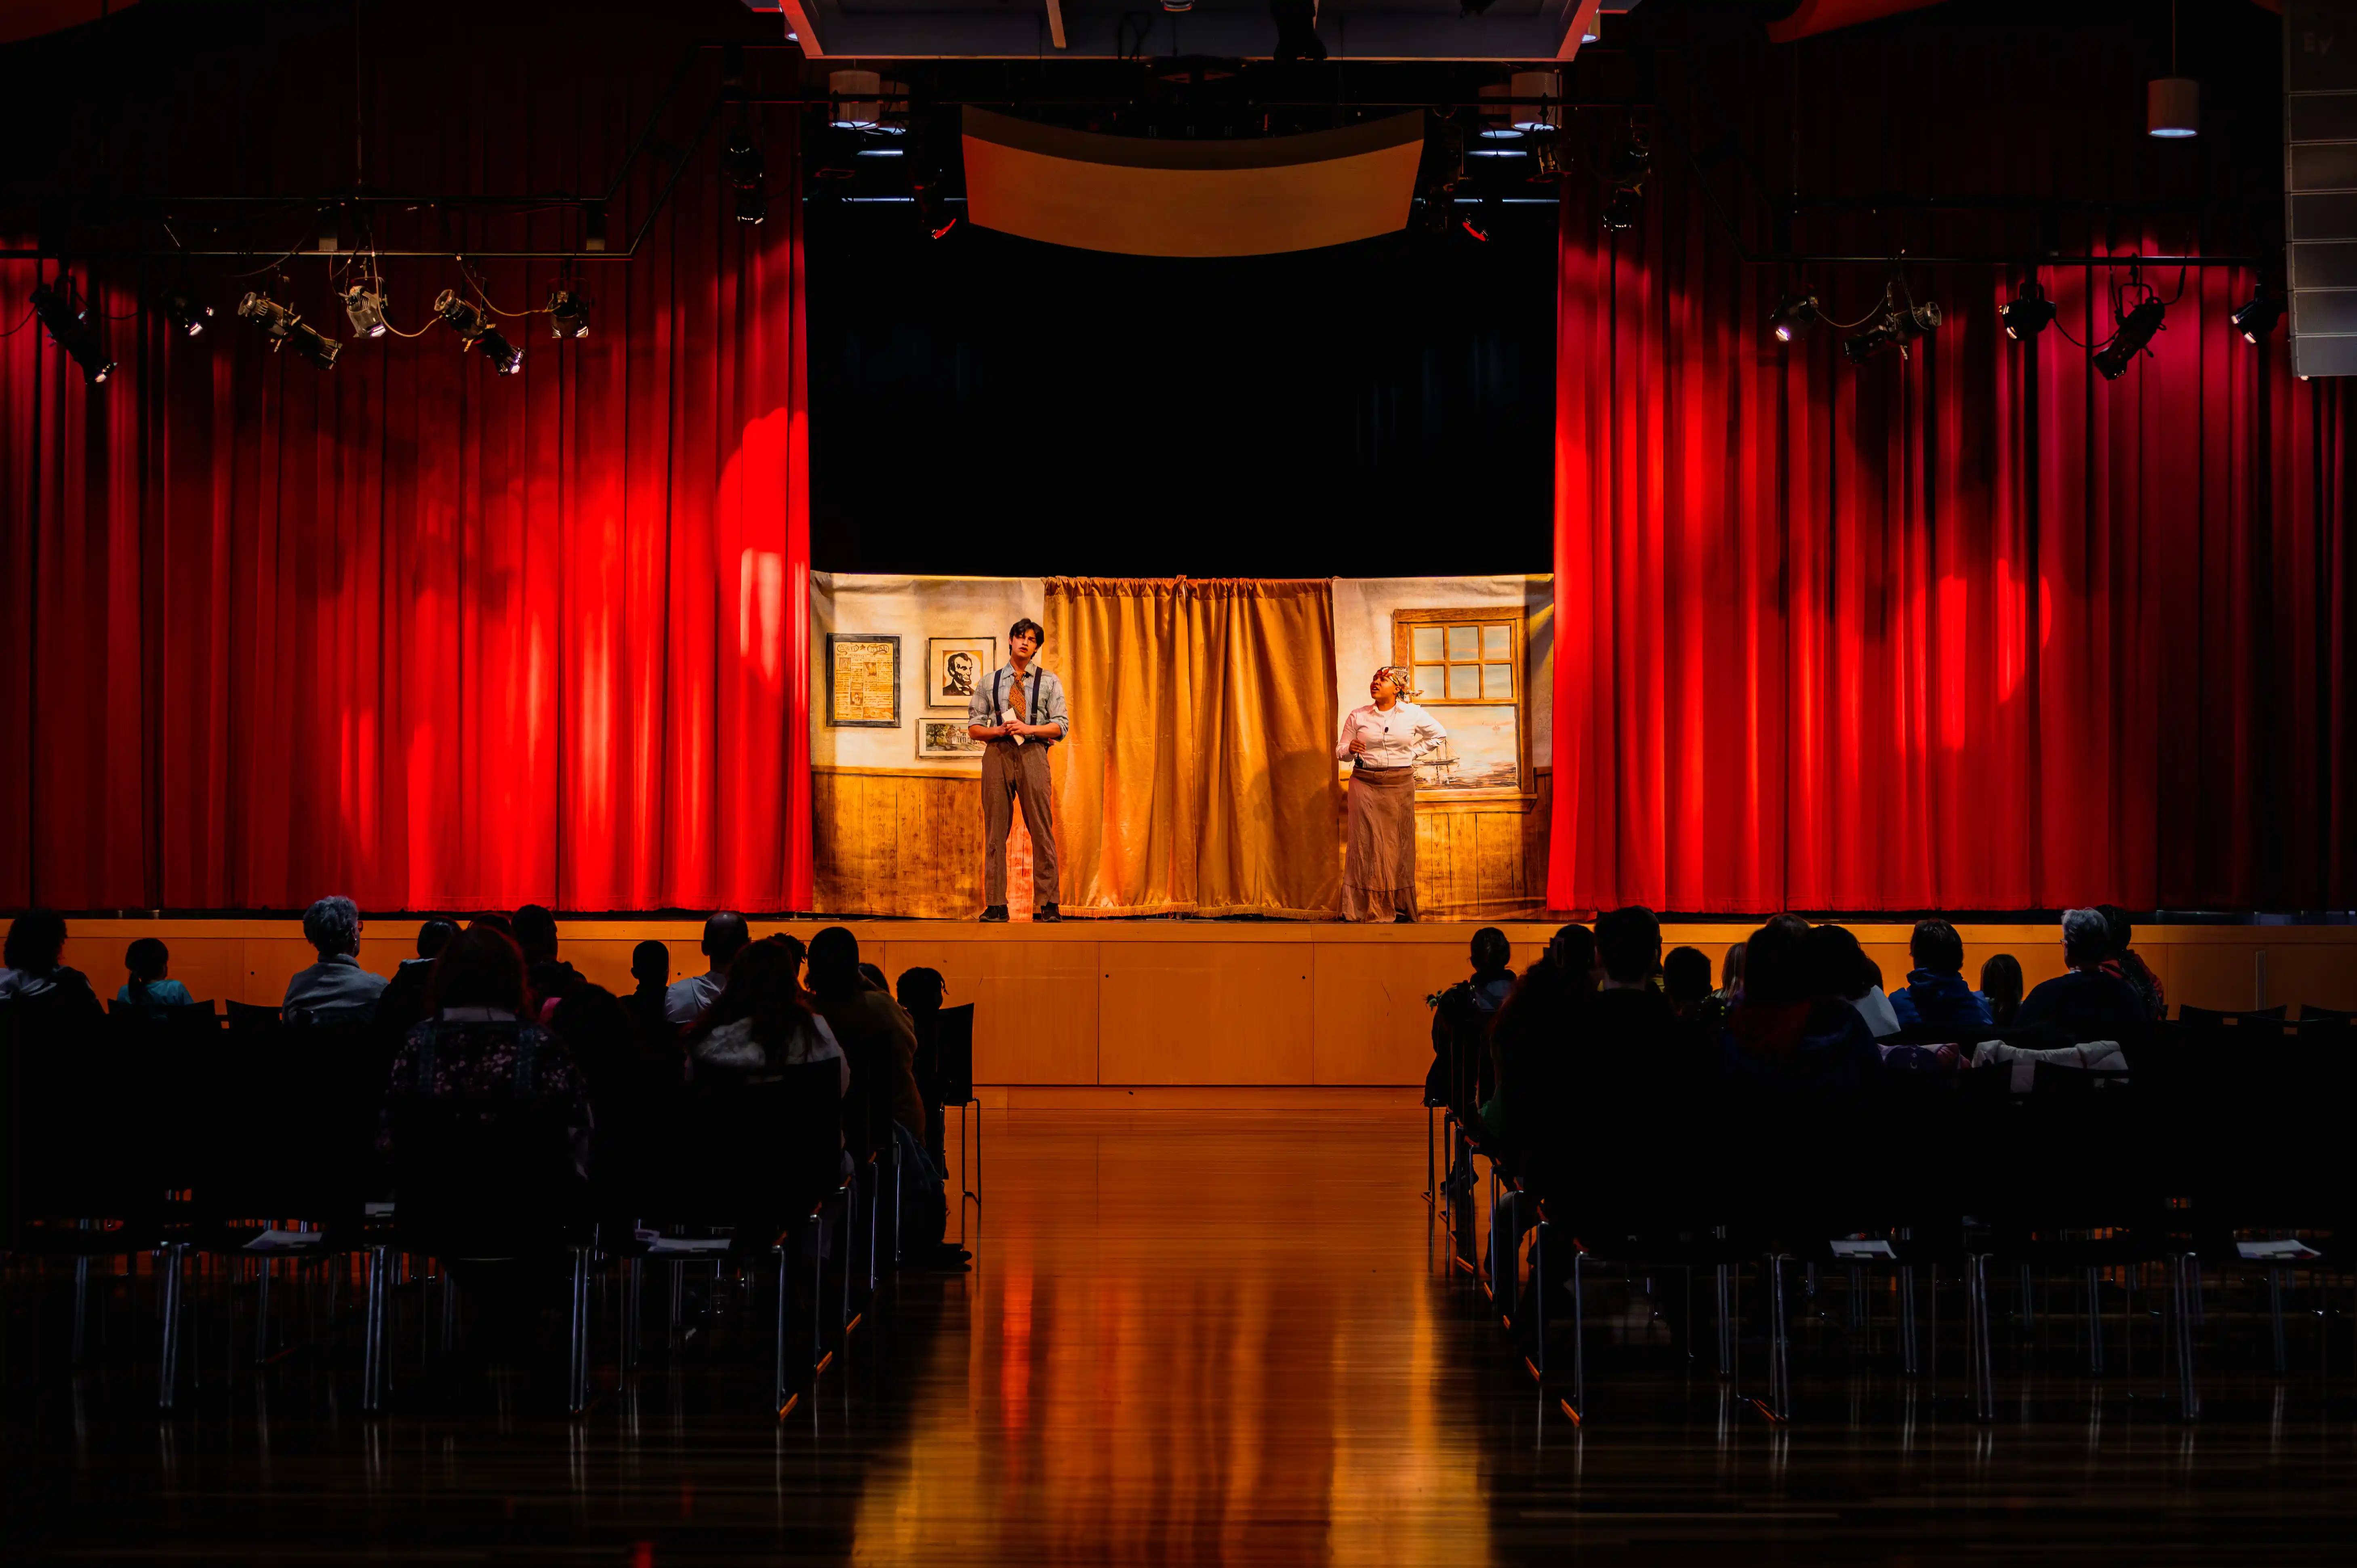 Audience watching two actors on stage in an intimate theater setting with red curtains.